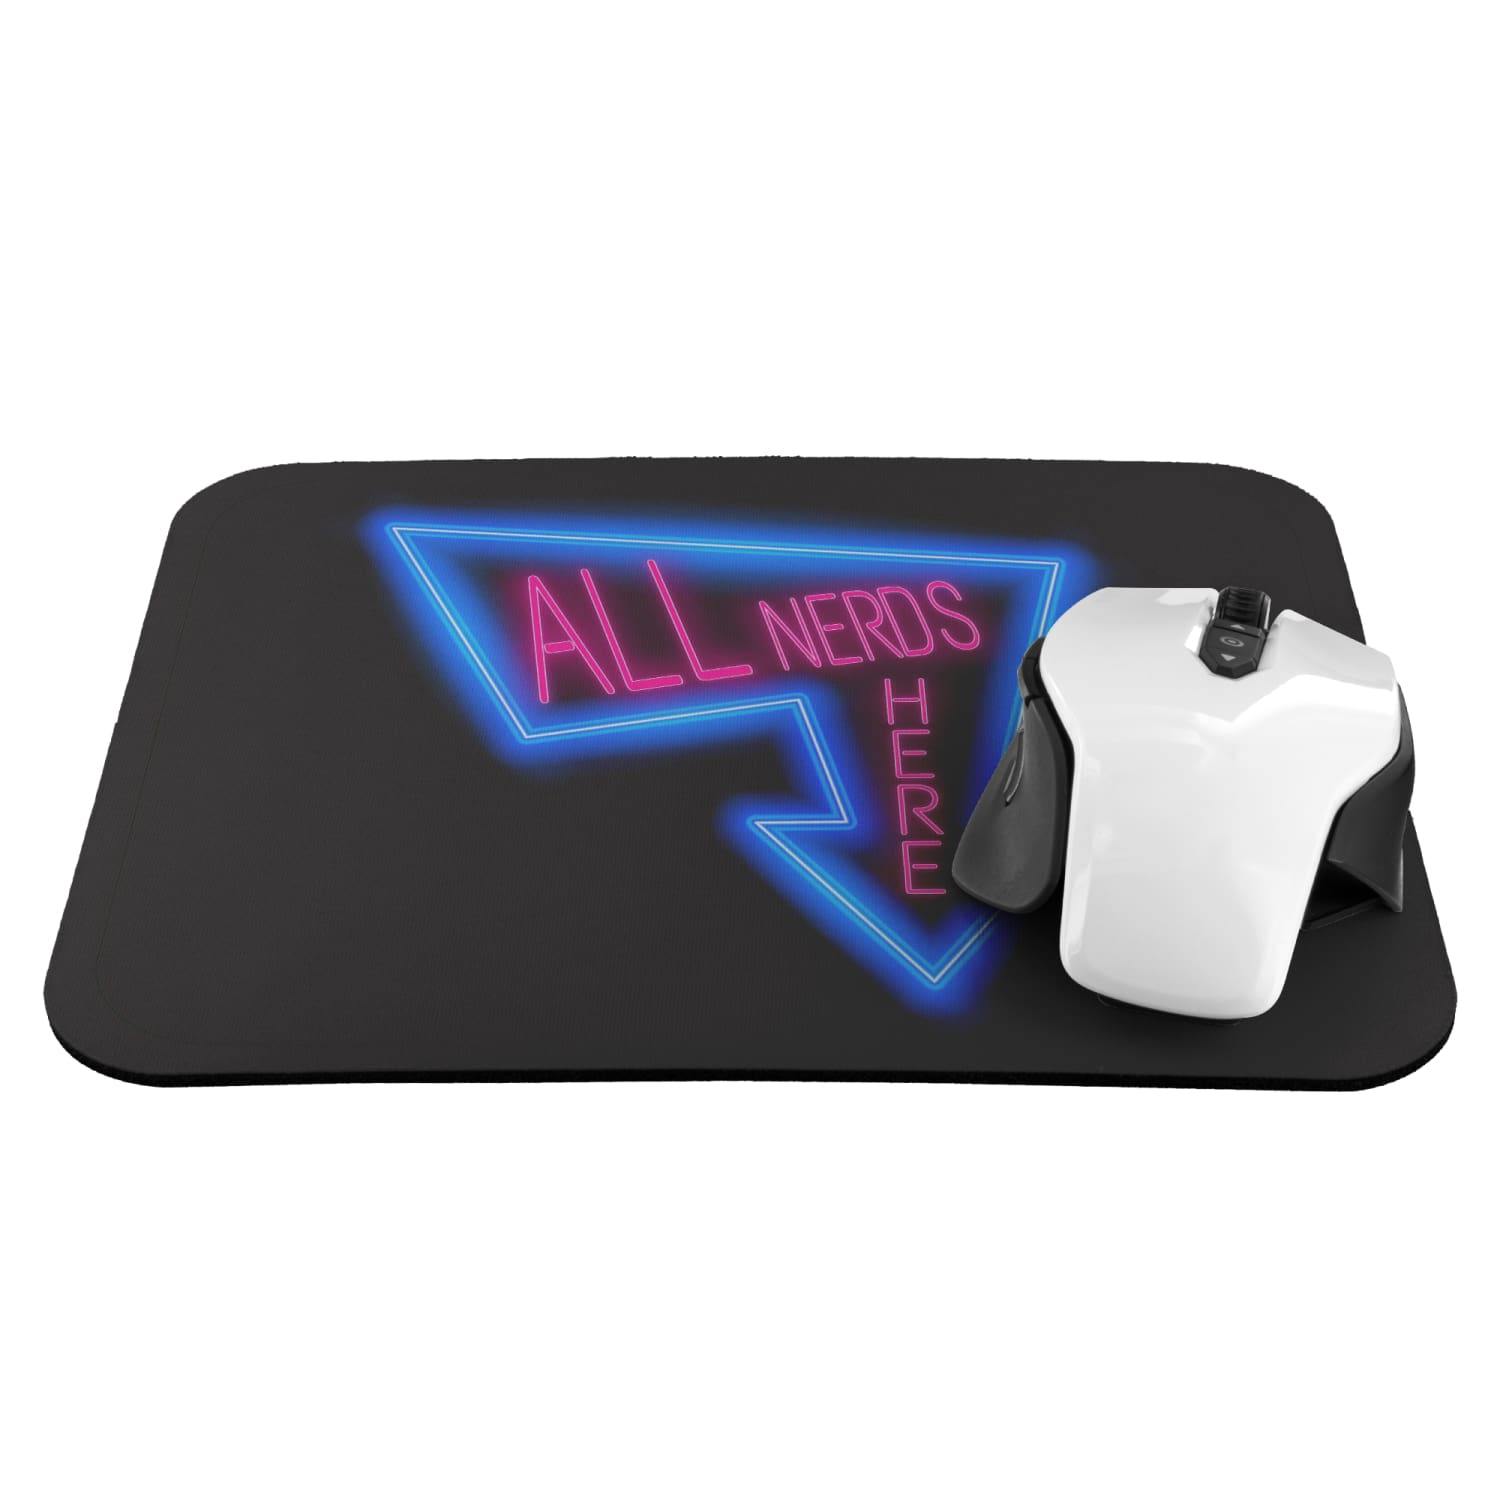 All Nerds Here Neon Logo Mousepad - ANH-NeonLog-Mou - All Nerds Here